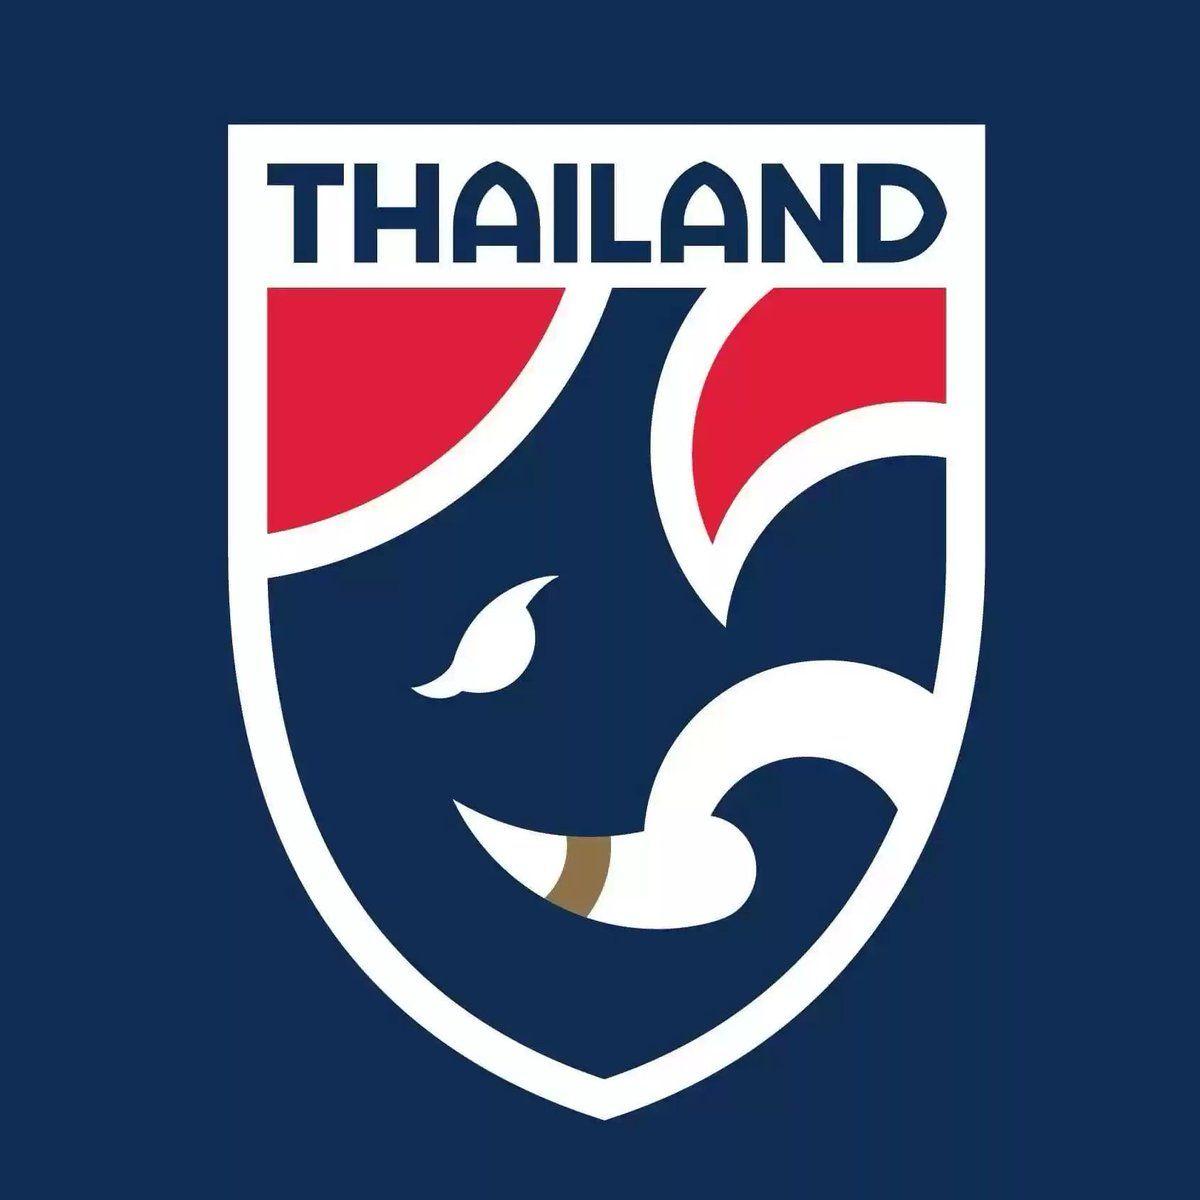 Cool Crest Logo - Michael Taylor saw the new Thai national team logo